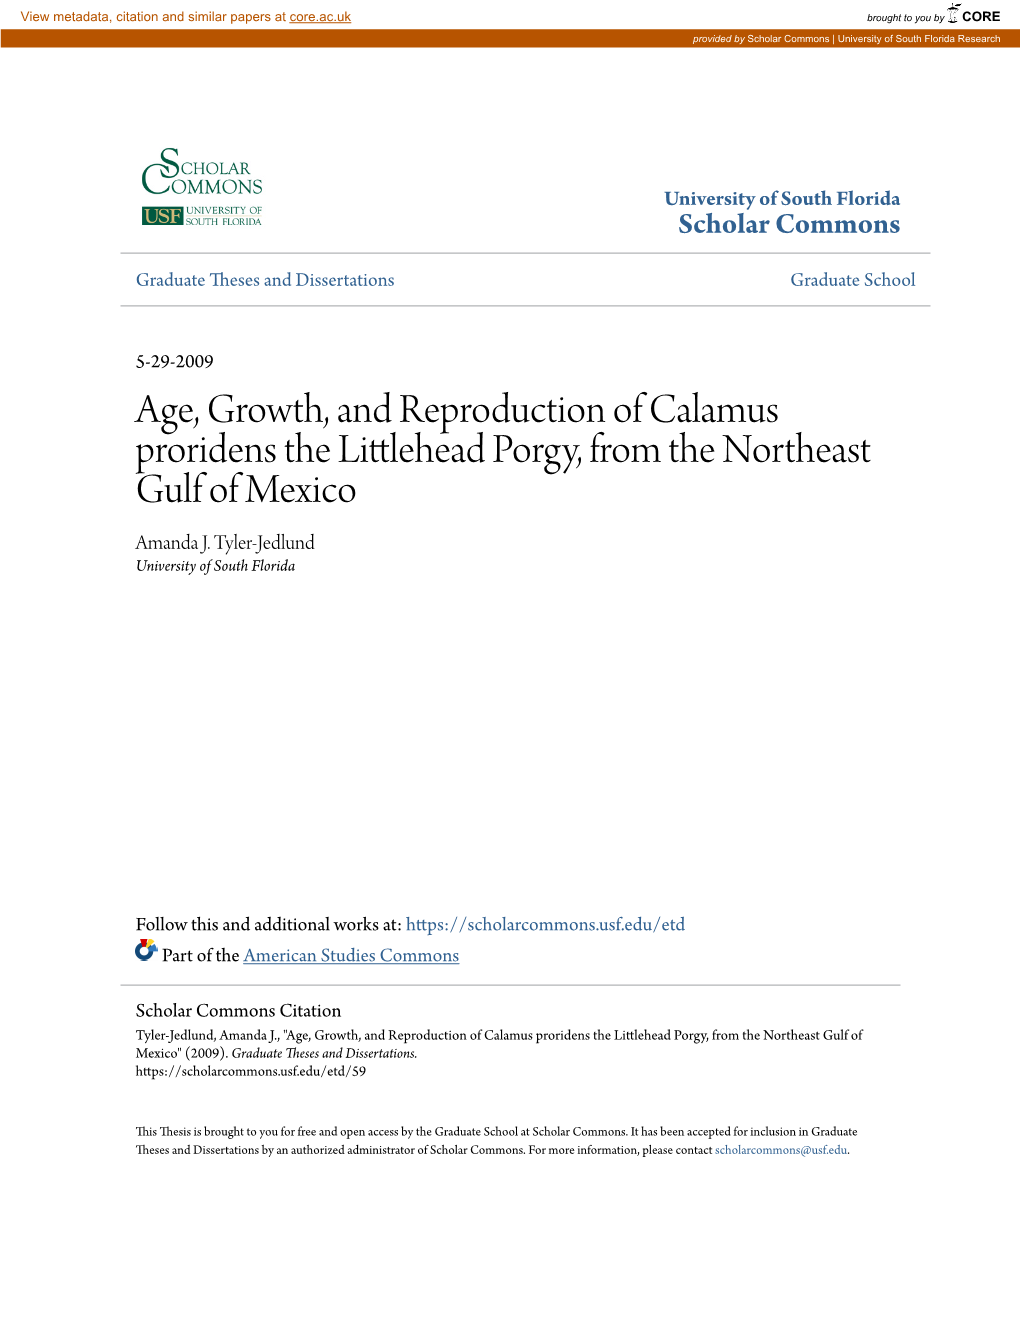 Age, Growth, and Reproduction of Calamus Proridens the Littlehead Porgy, from the Northeast Gulf of Mexico Amanda J